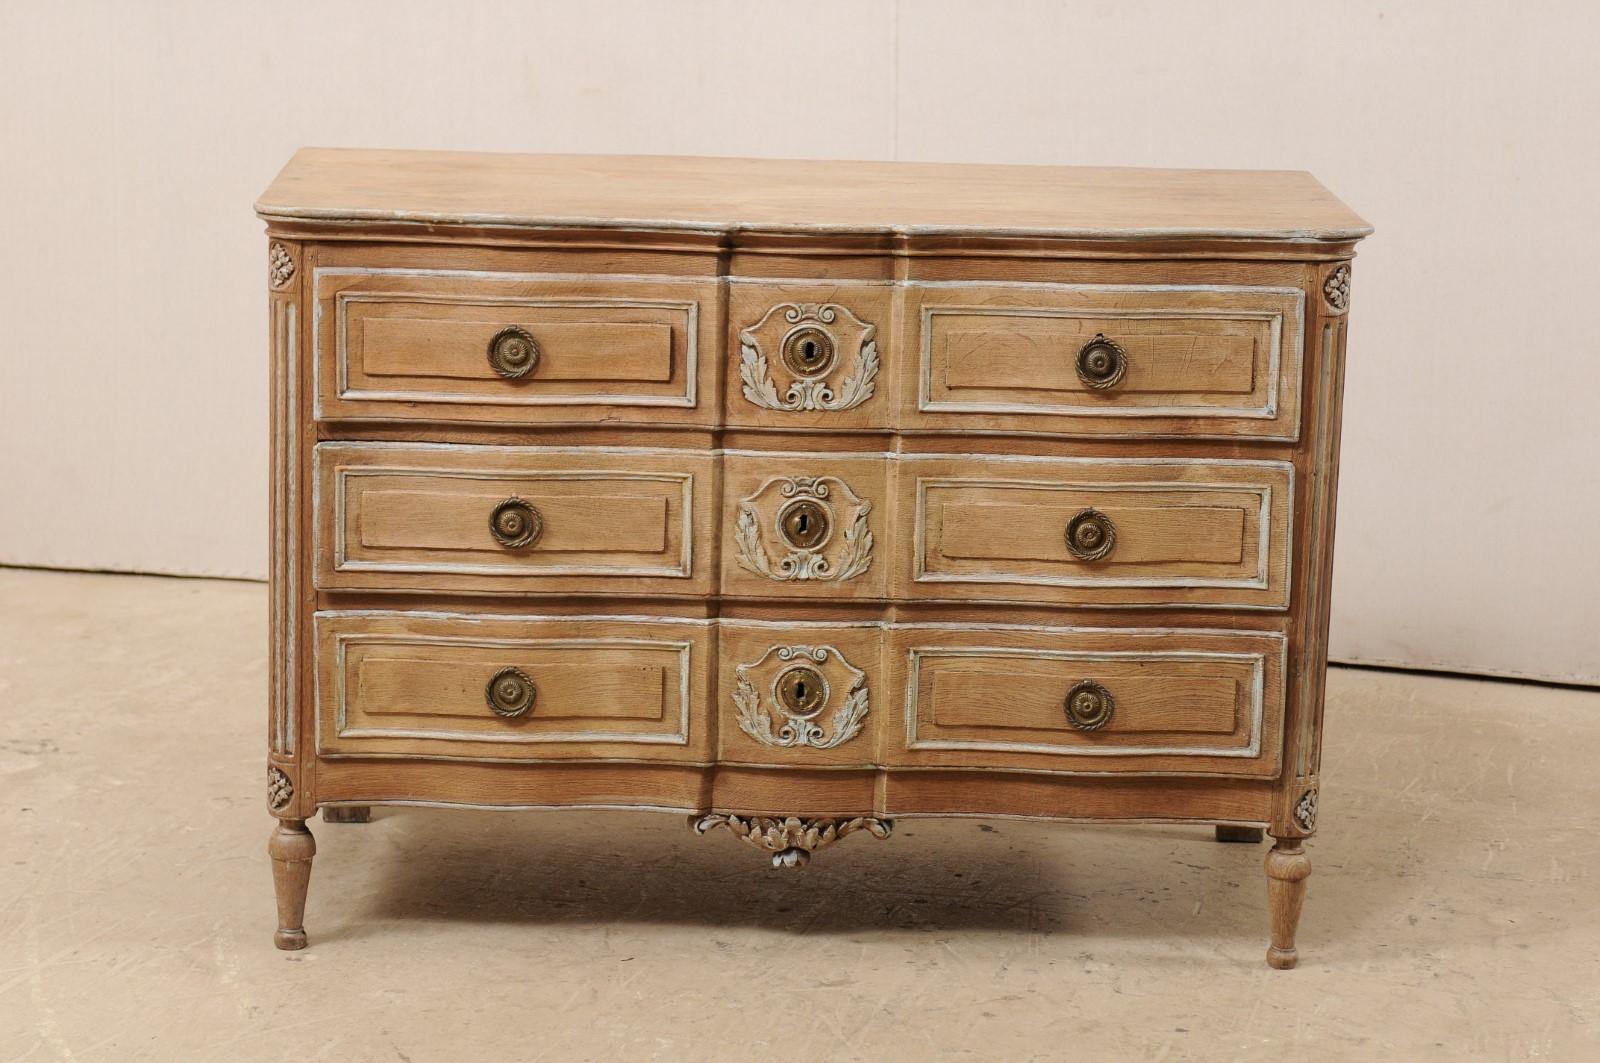 Hand-Carved 18th Century French Neoclassical Chest with Floral Carved Serpentine Front